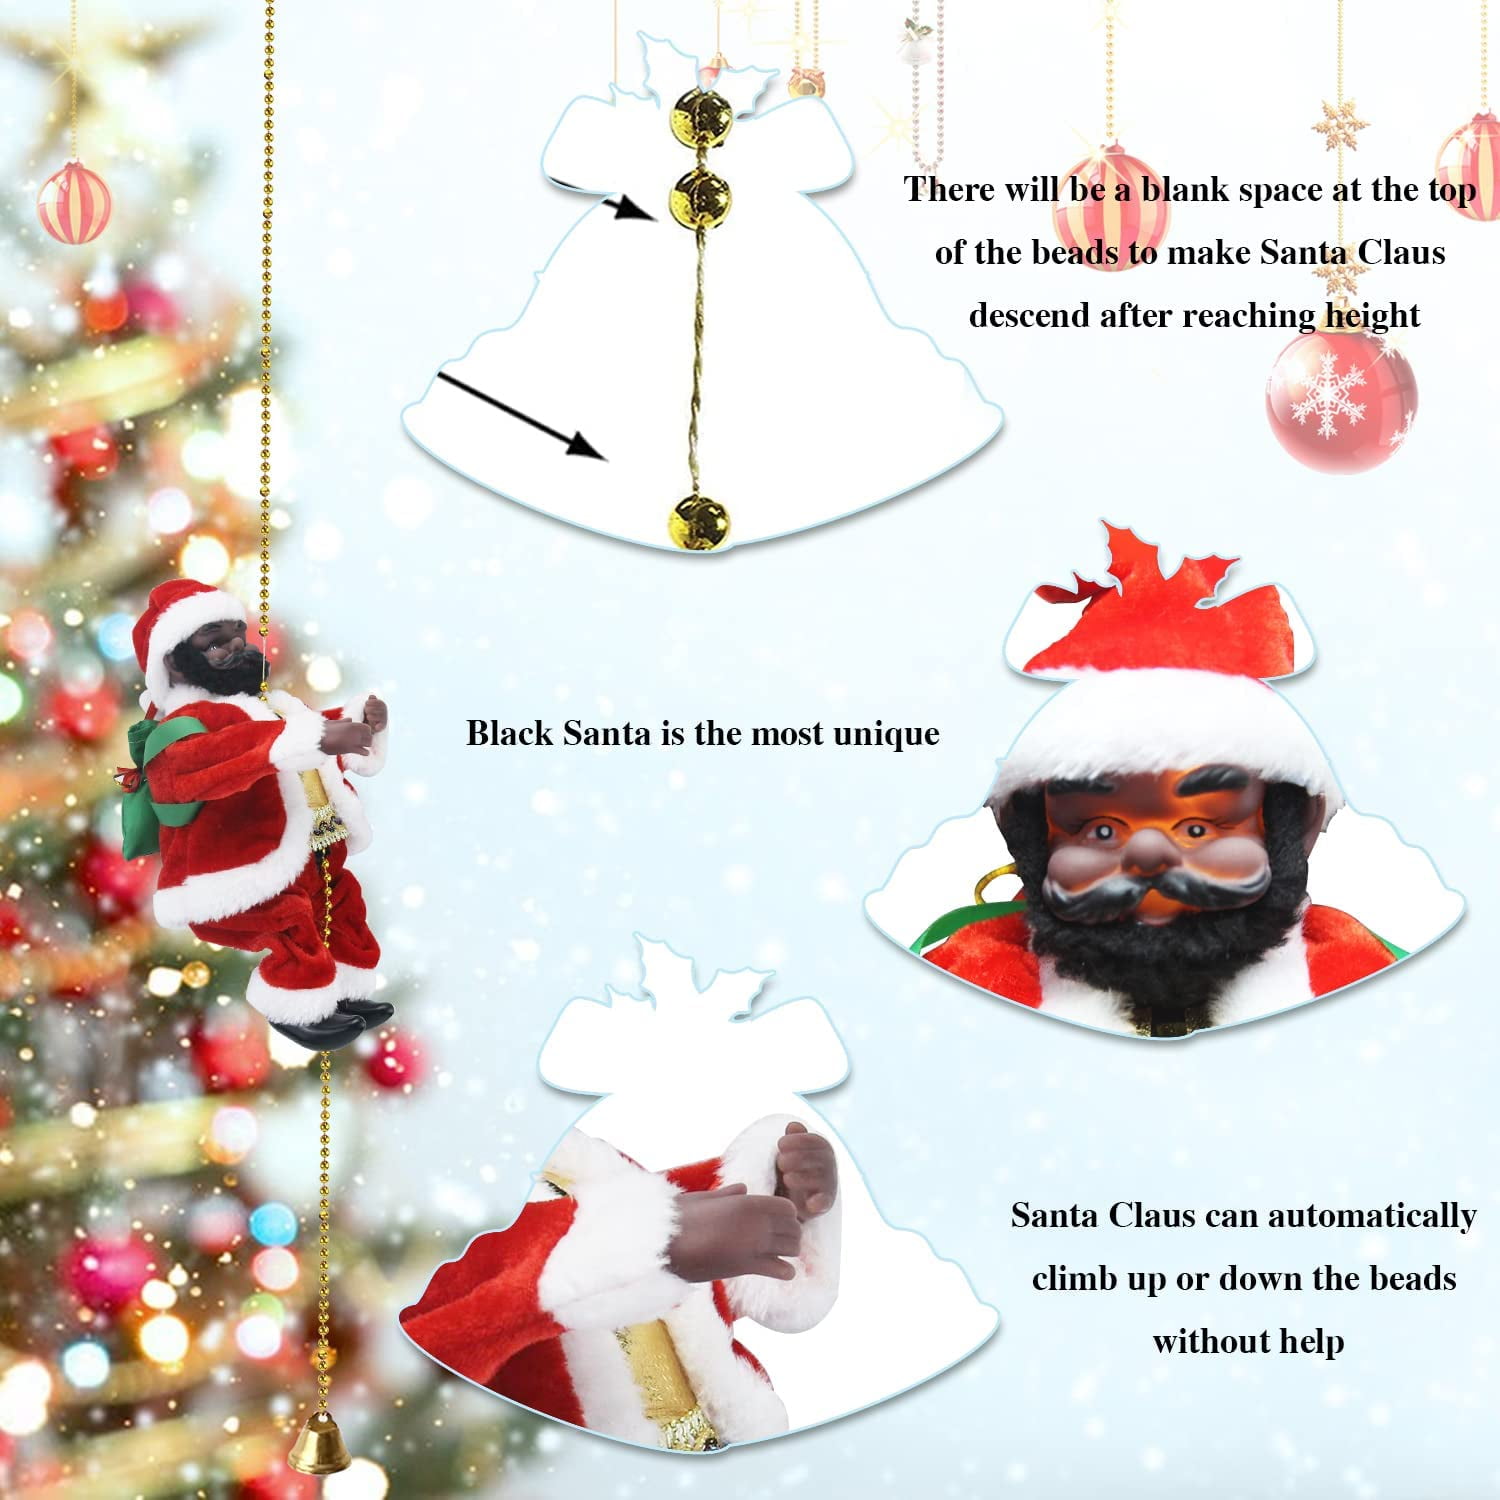 Waterproof LED Black Santa Climbing Ladder Climbing Rope Ladder With Remote  Control Indoor/Outdoor Christmas Decoration From Bian09, $19.88